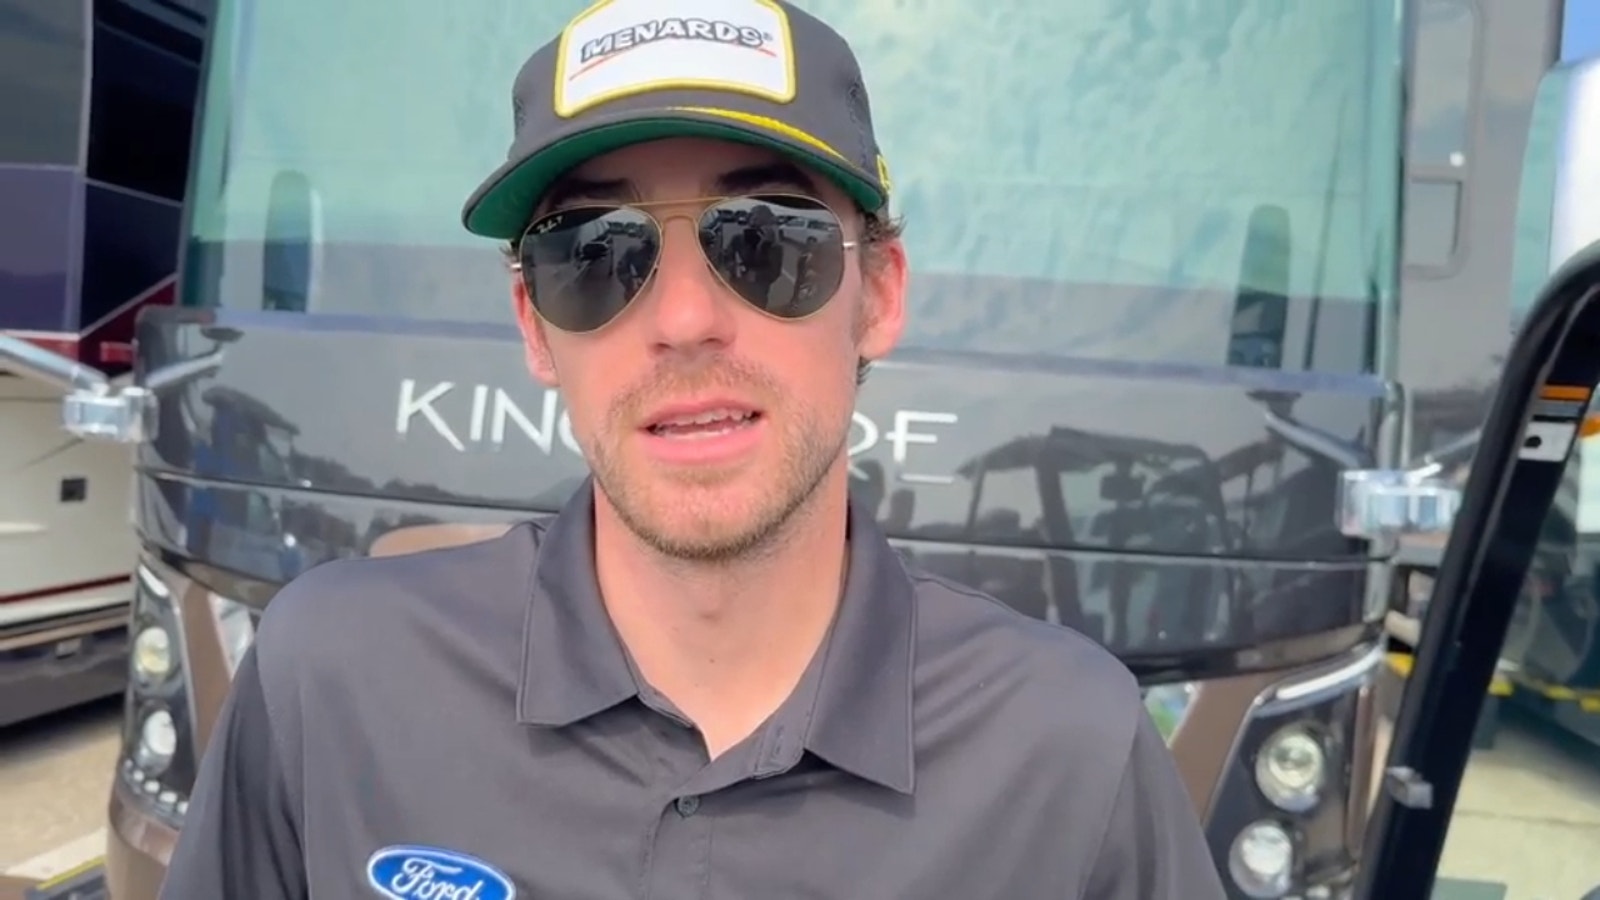 Ryan Blaney on the misconception he has dirt/sprint car experience because of his background